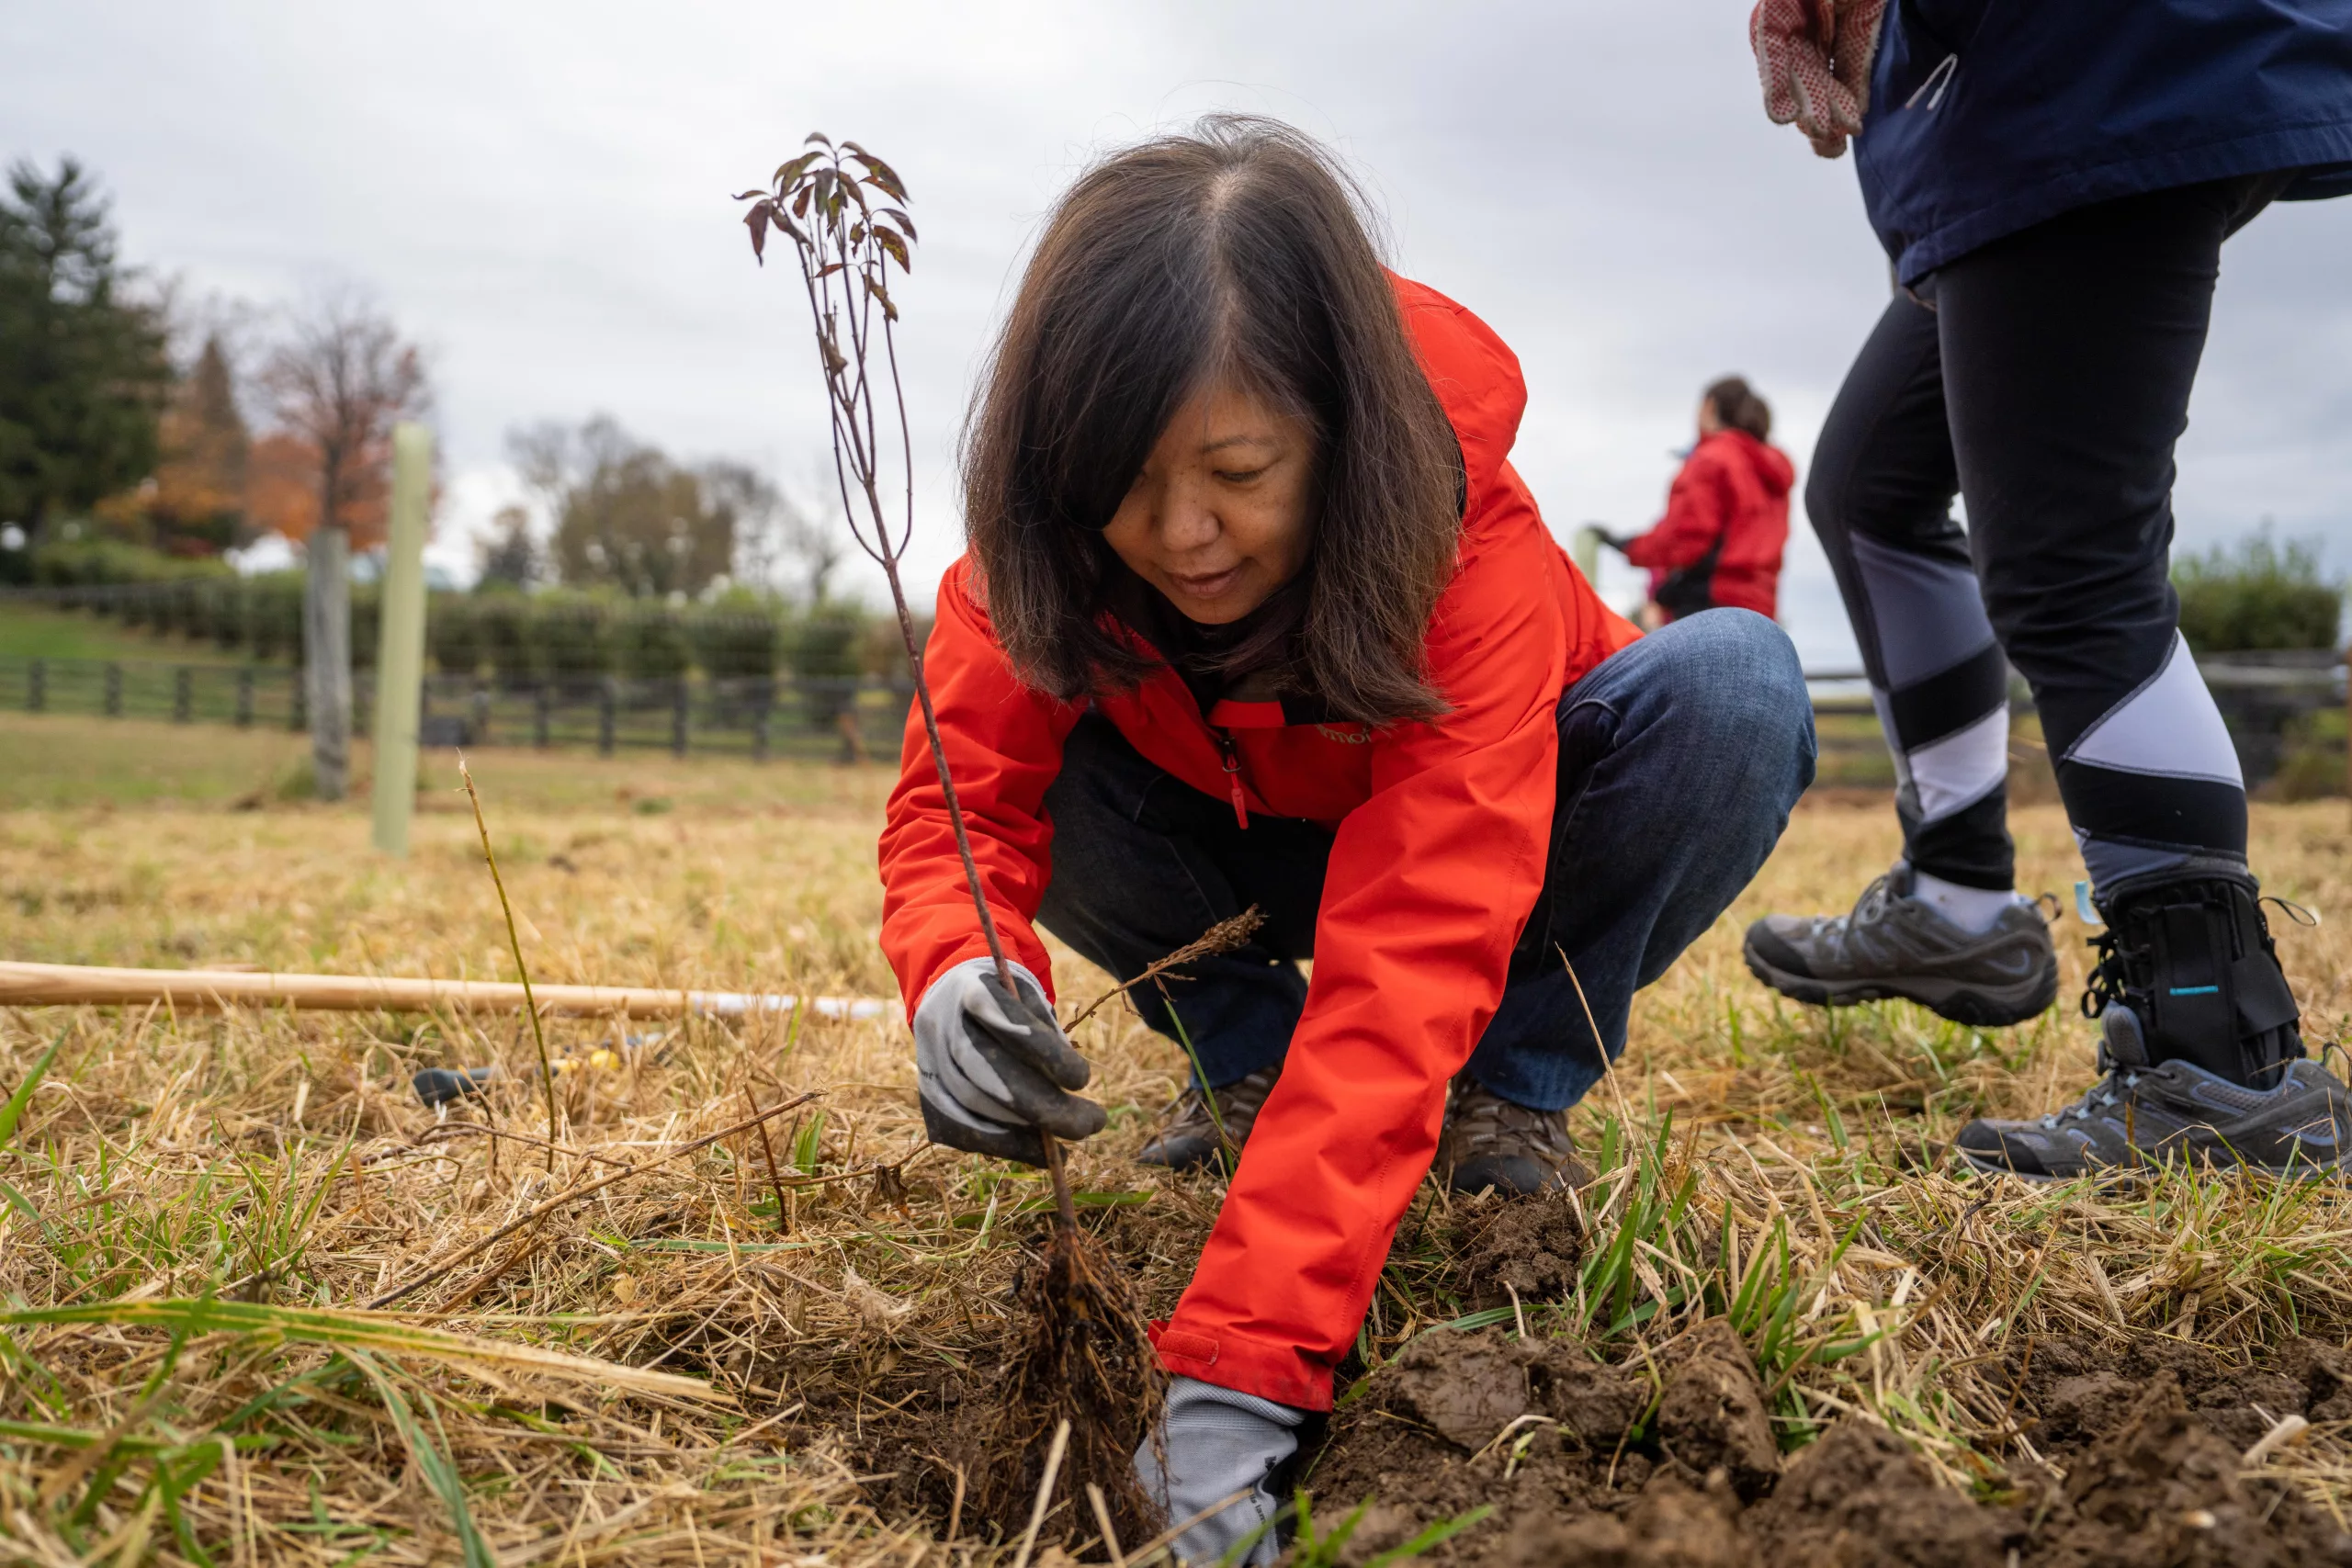 a woman plants a tree sapling in the ground